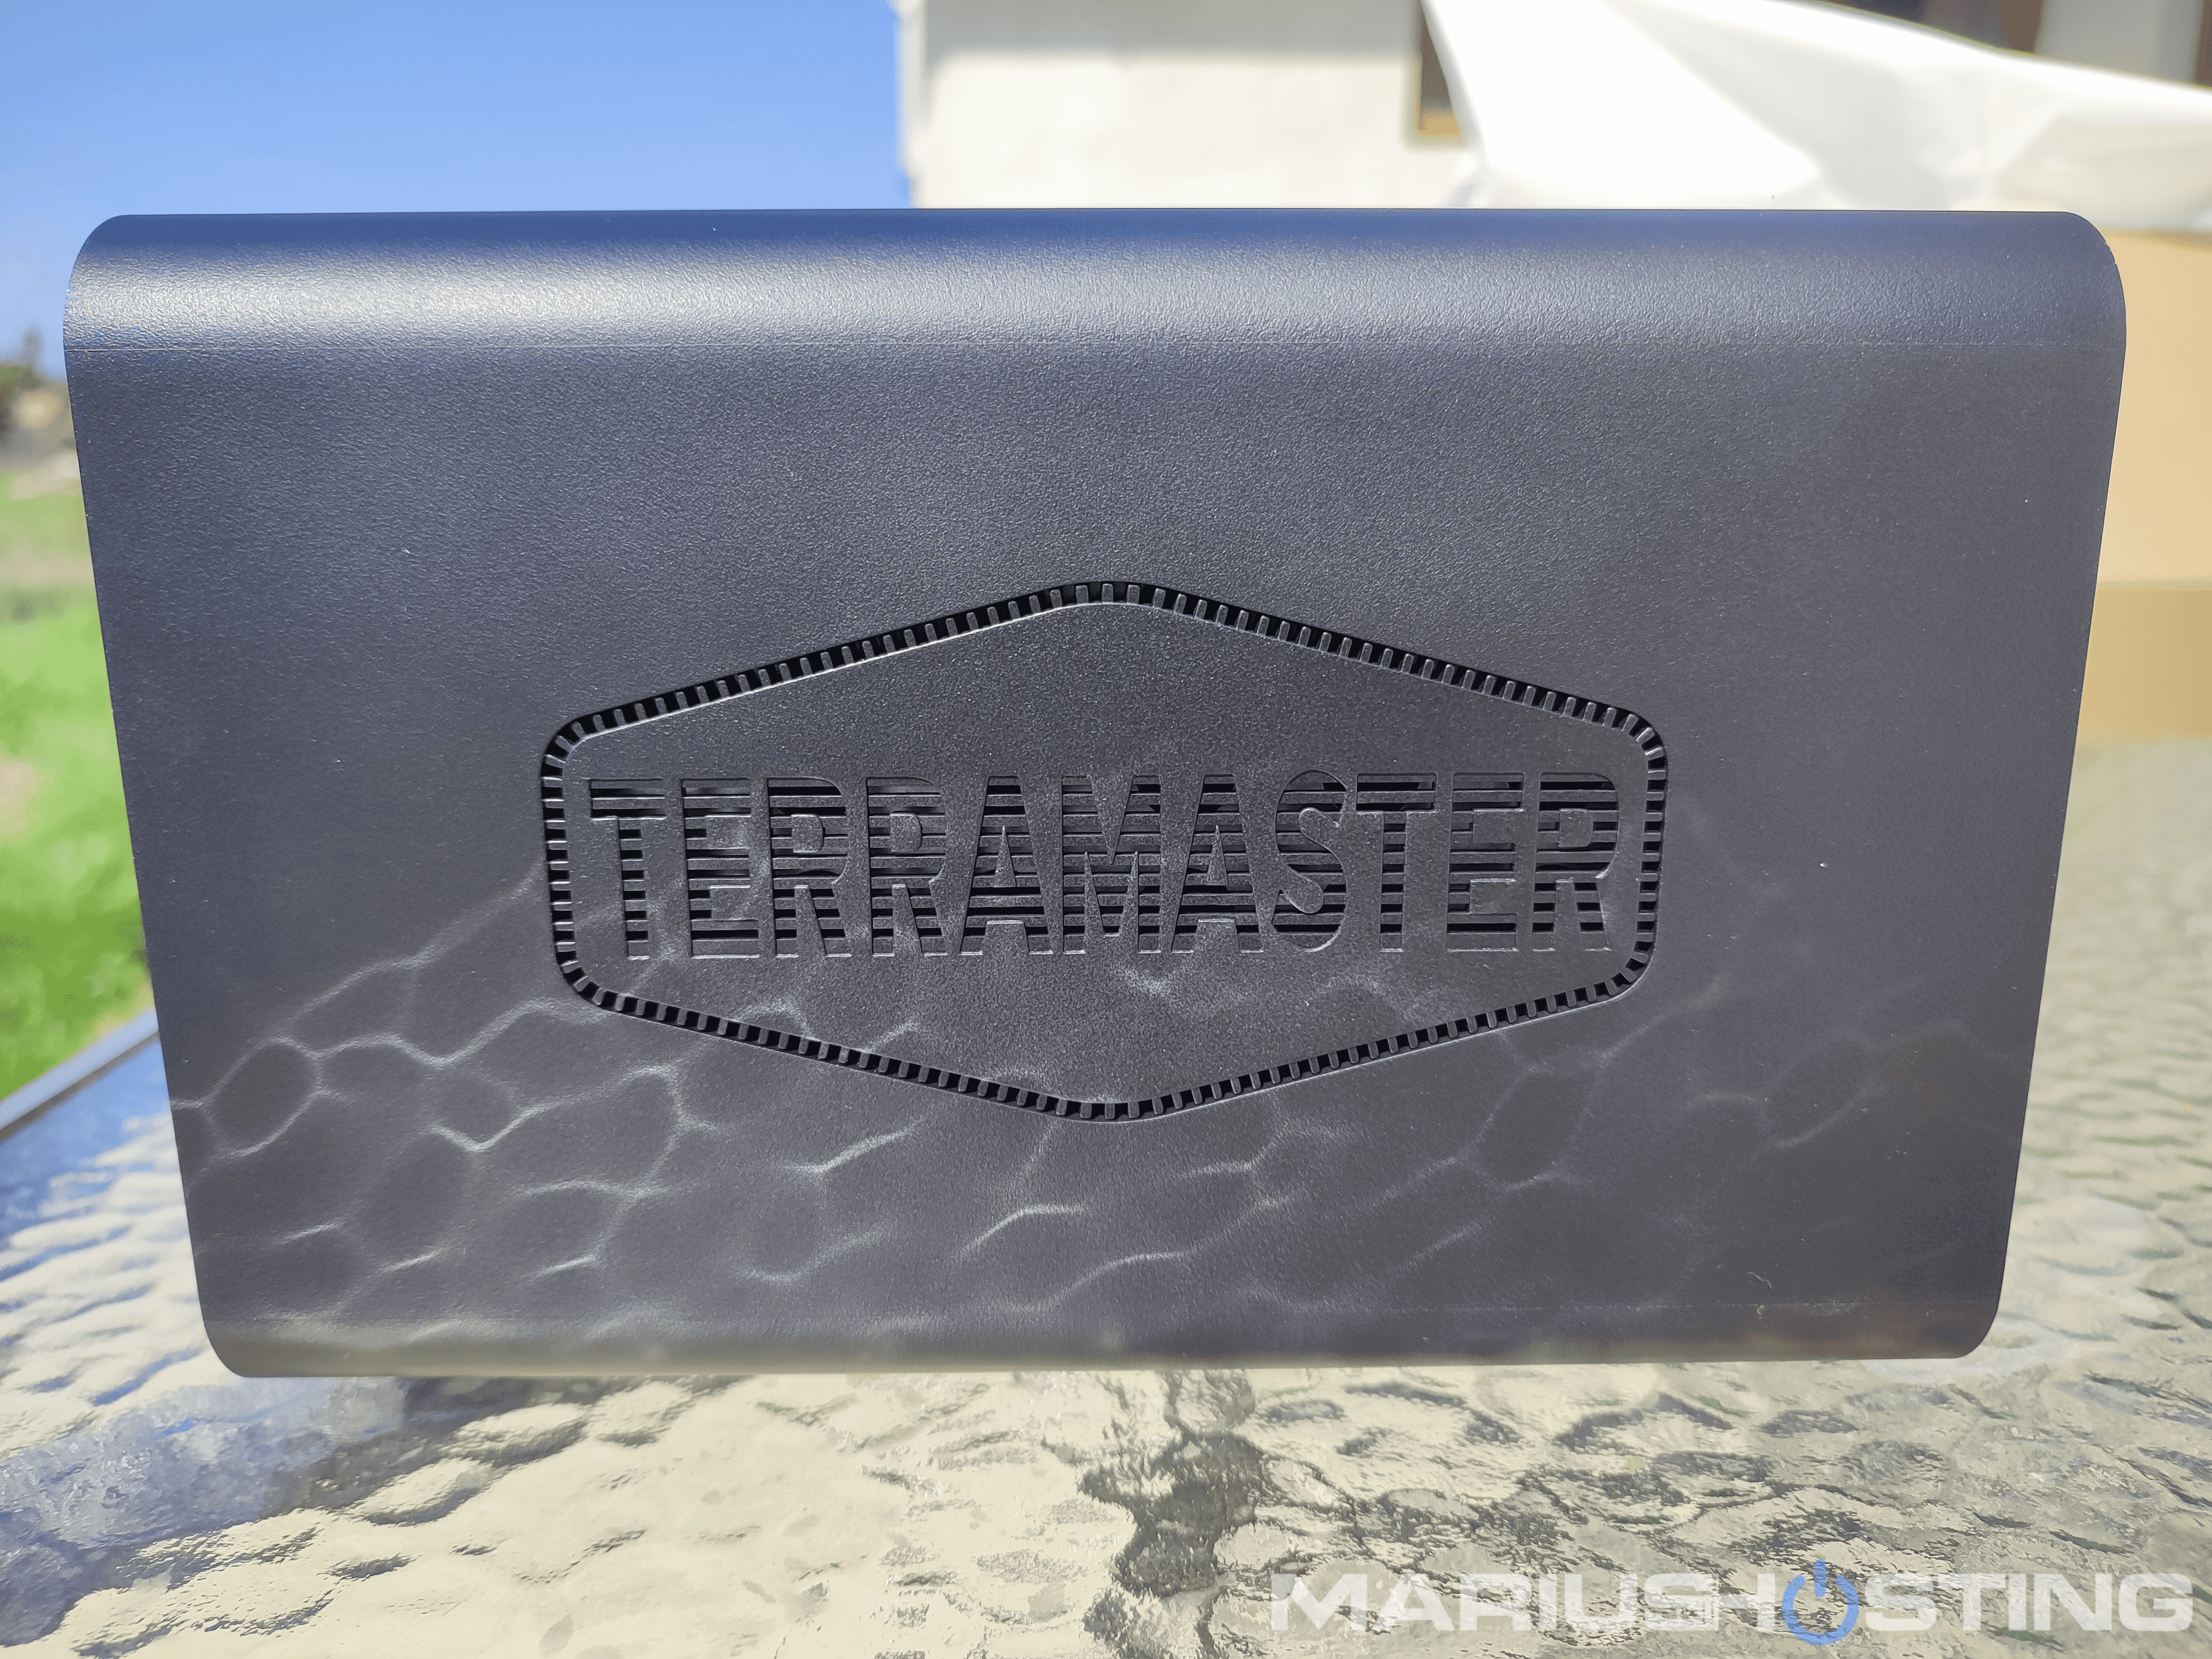 6 TerraMaster F4-424 Pro Review